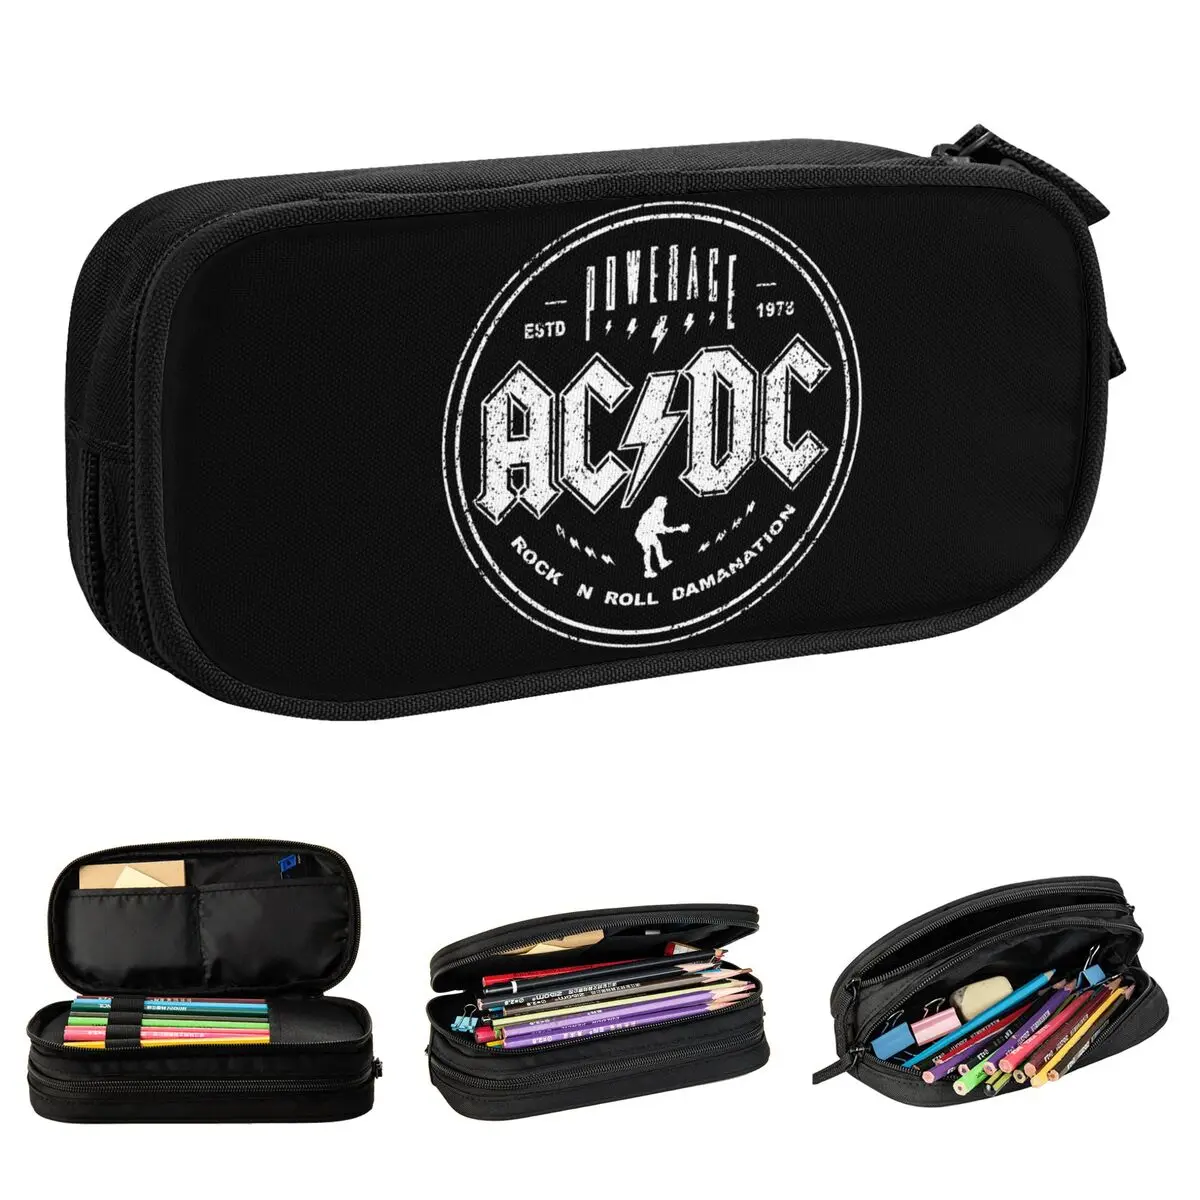 

Large-capacity Pencil Pouch Ac High Voltage Rock Band Merch Double Layer Pencil Bag Women Makeup Bag Perfect Gifts